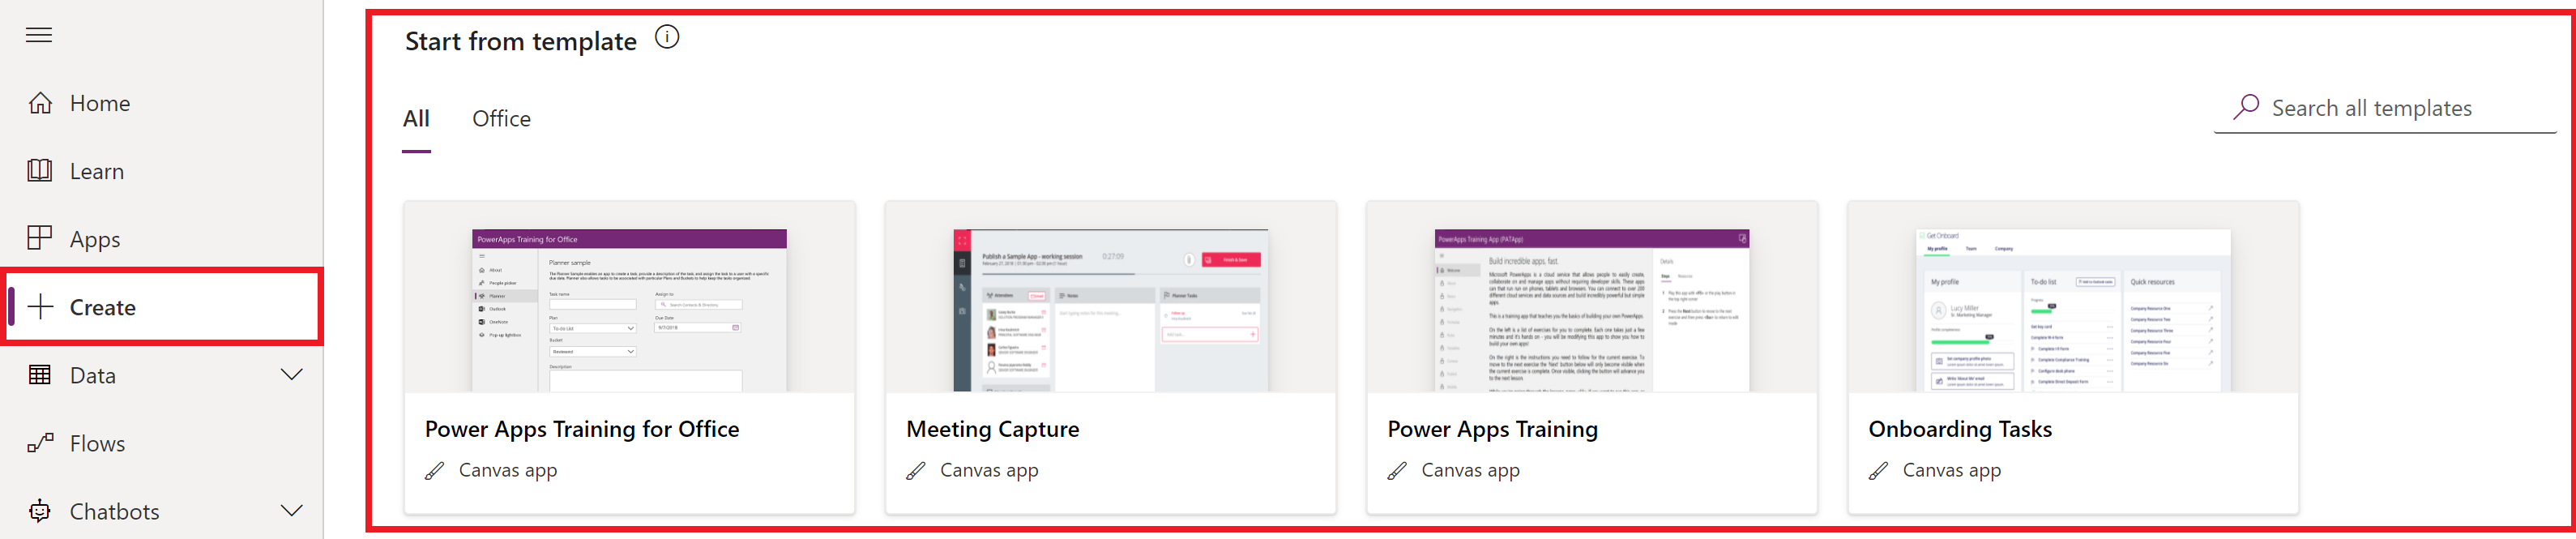 Sito Power Apps.